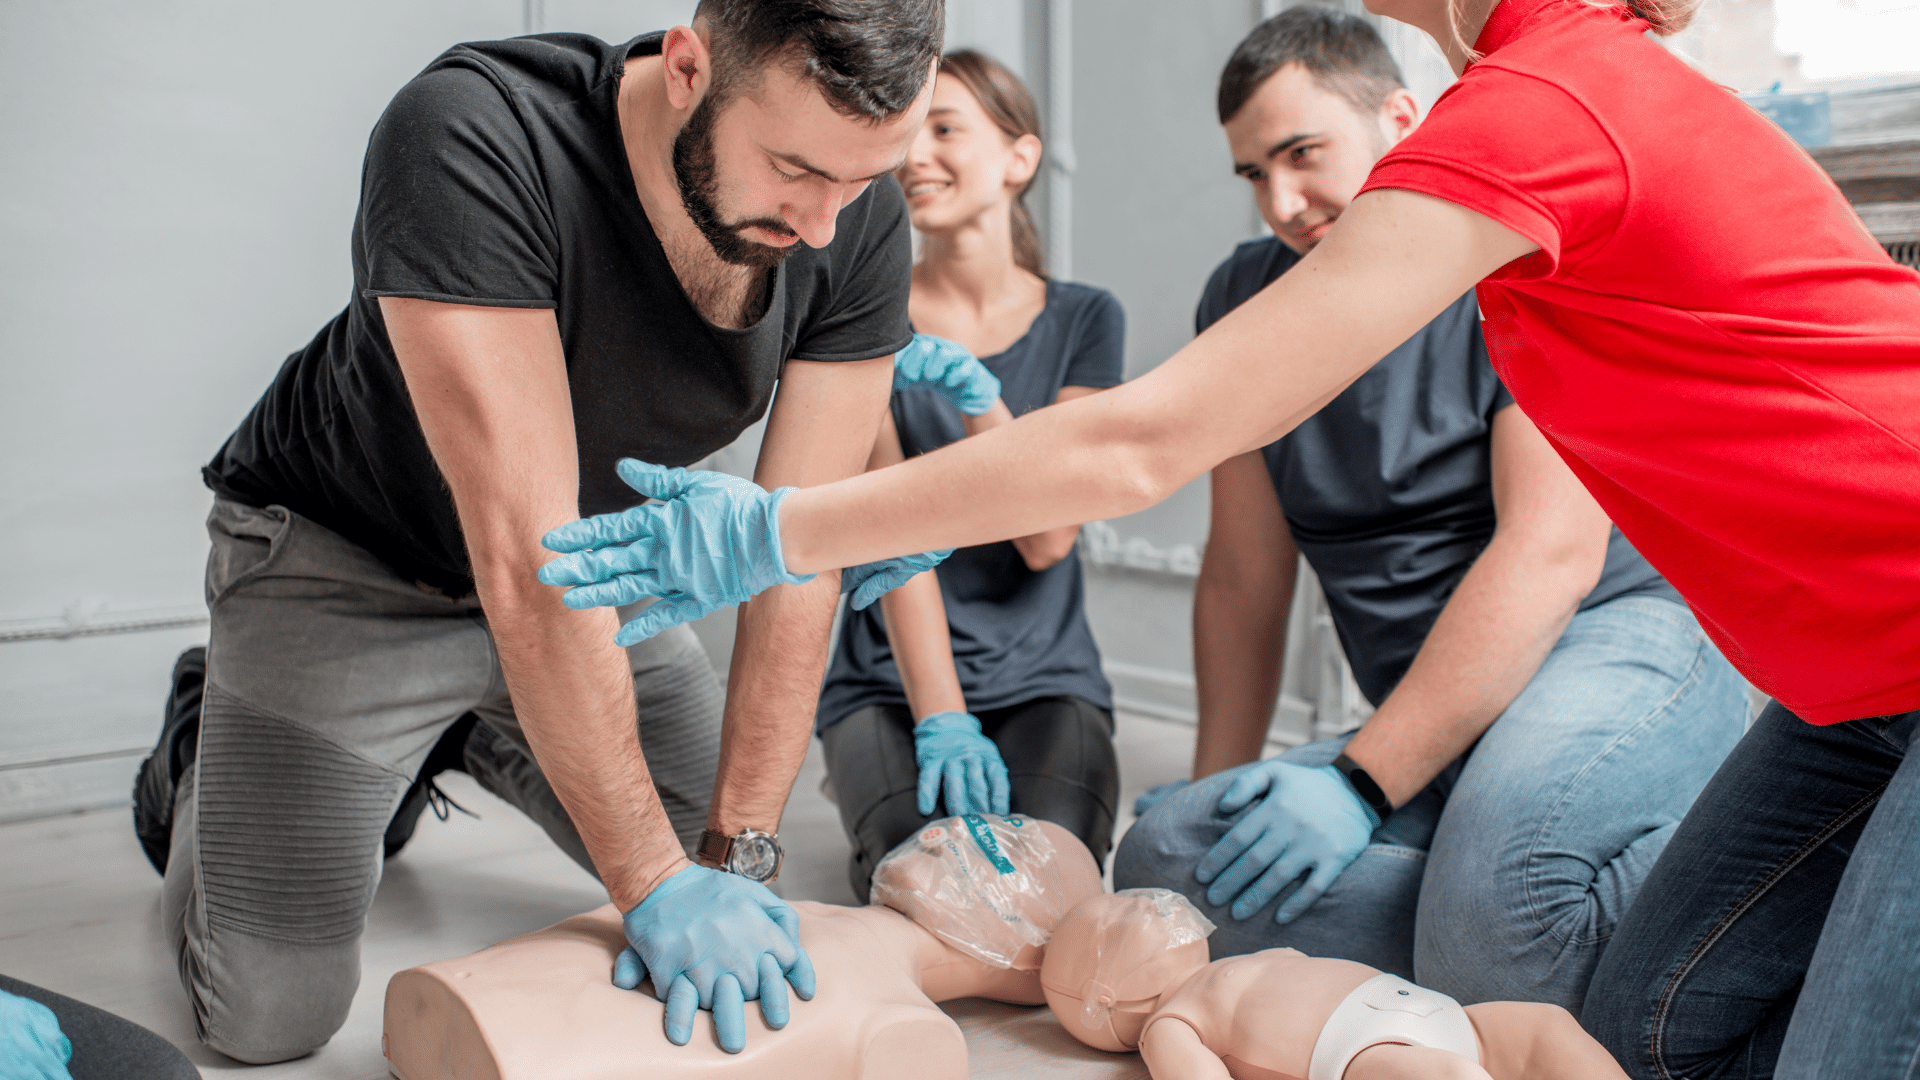 Instructor teaching how to perfrom CPR on a dummy